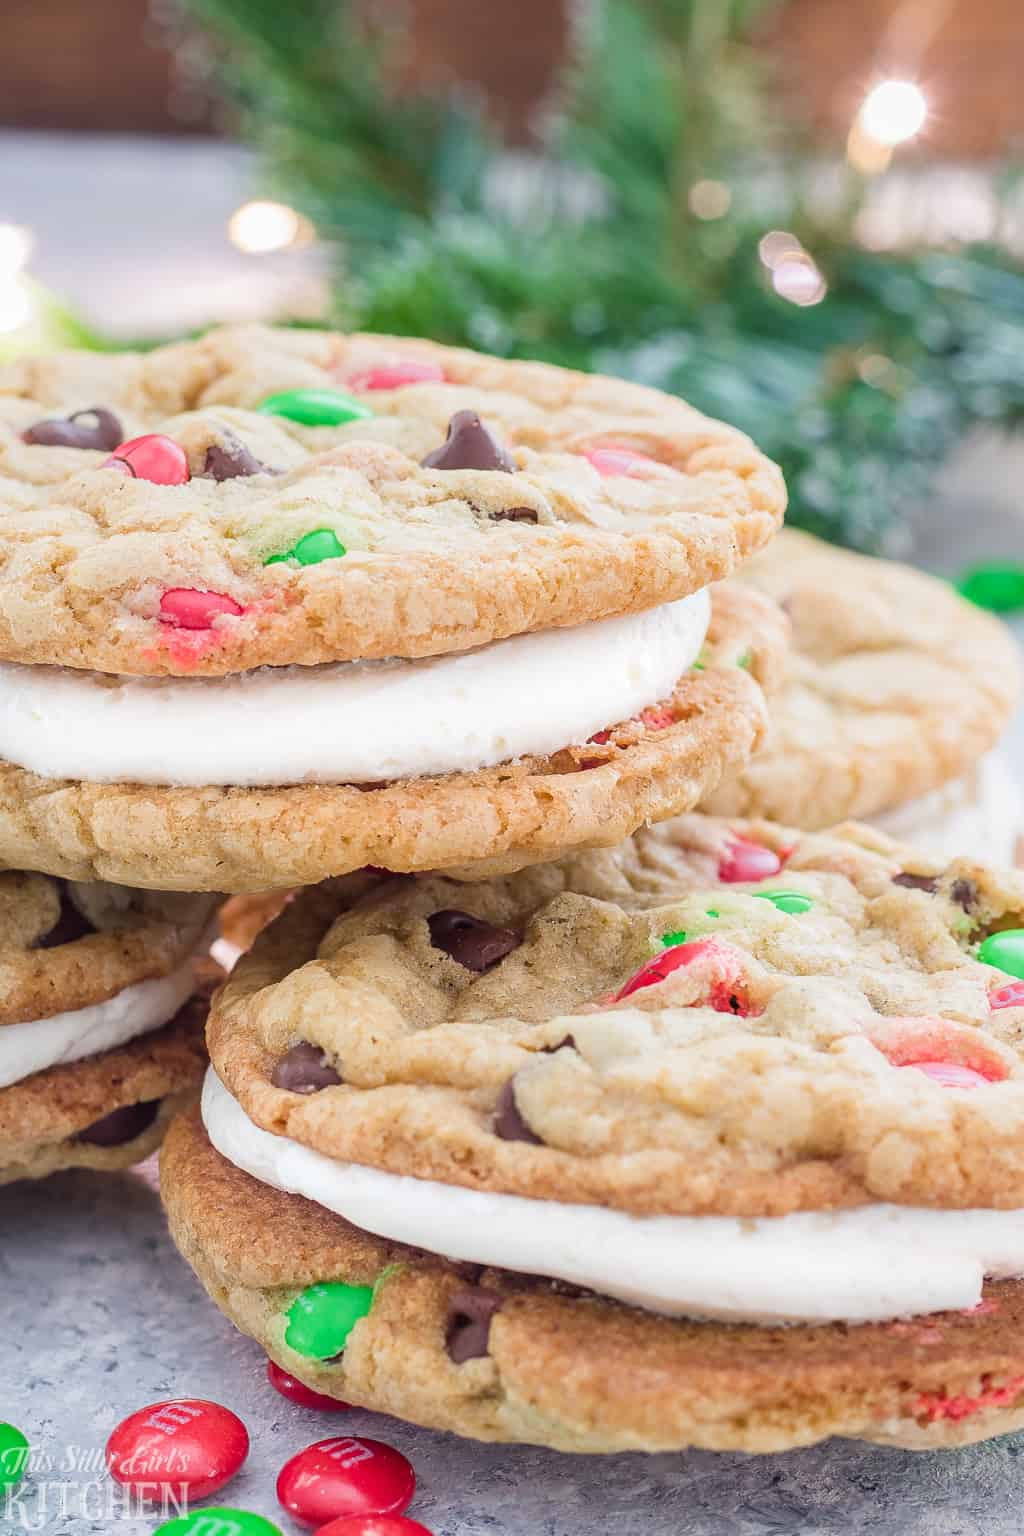 Christmas Cookie Sandwiches, the fluffiest buttercream frosting sandwiched between two soft and chewy chocolate chip cookies loaded with holiday M&M's! #Recipe from ThisSillyGirlsKitchen.com #ChristmasCookies #SandwichCookies #CookiesForSanta #Christmas